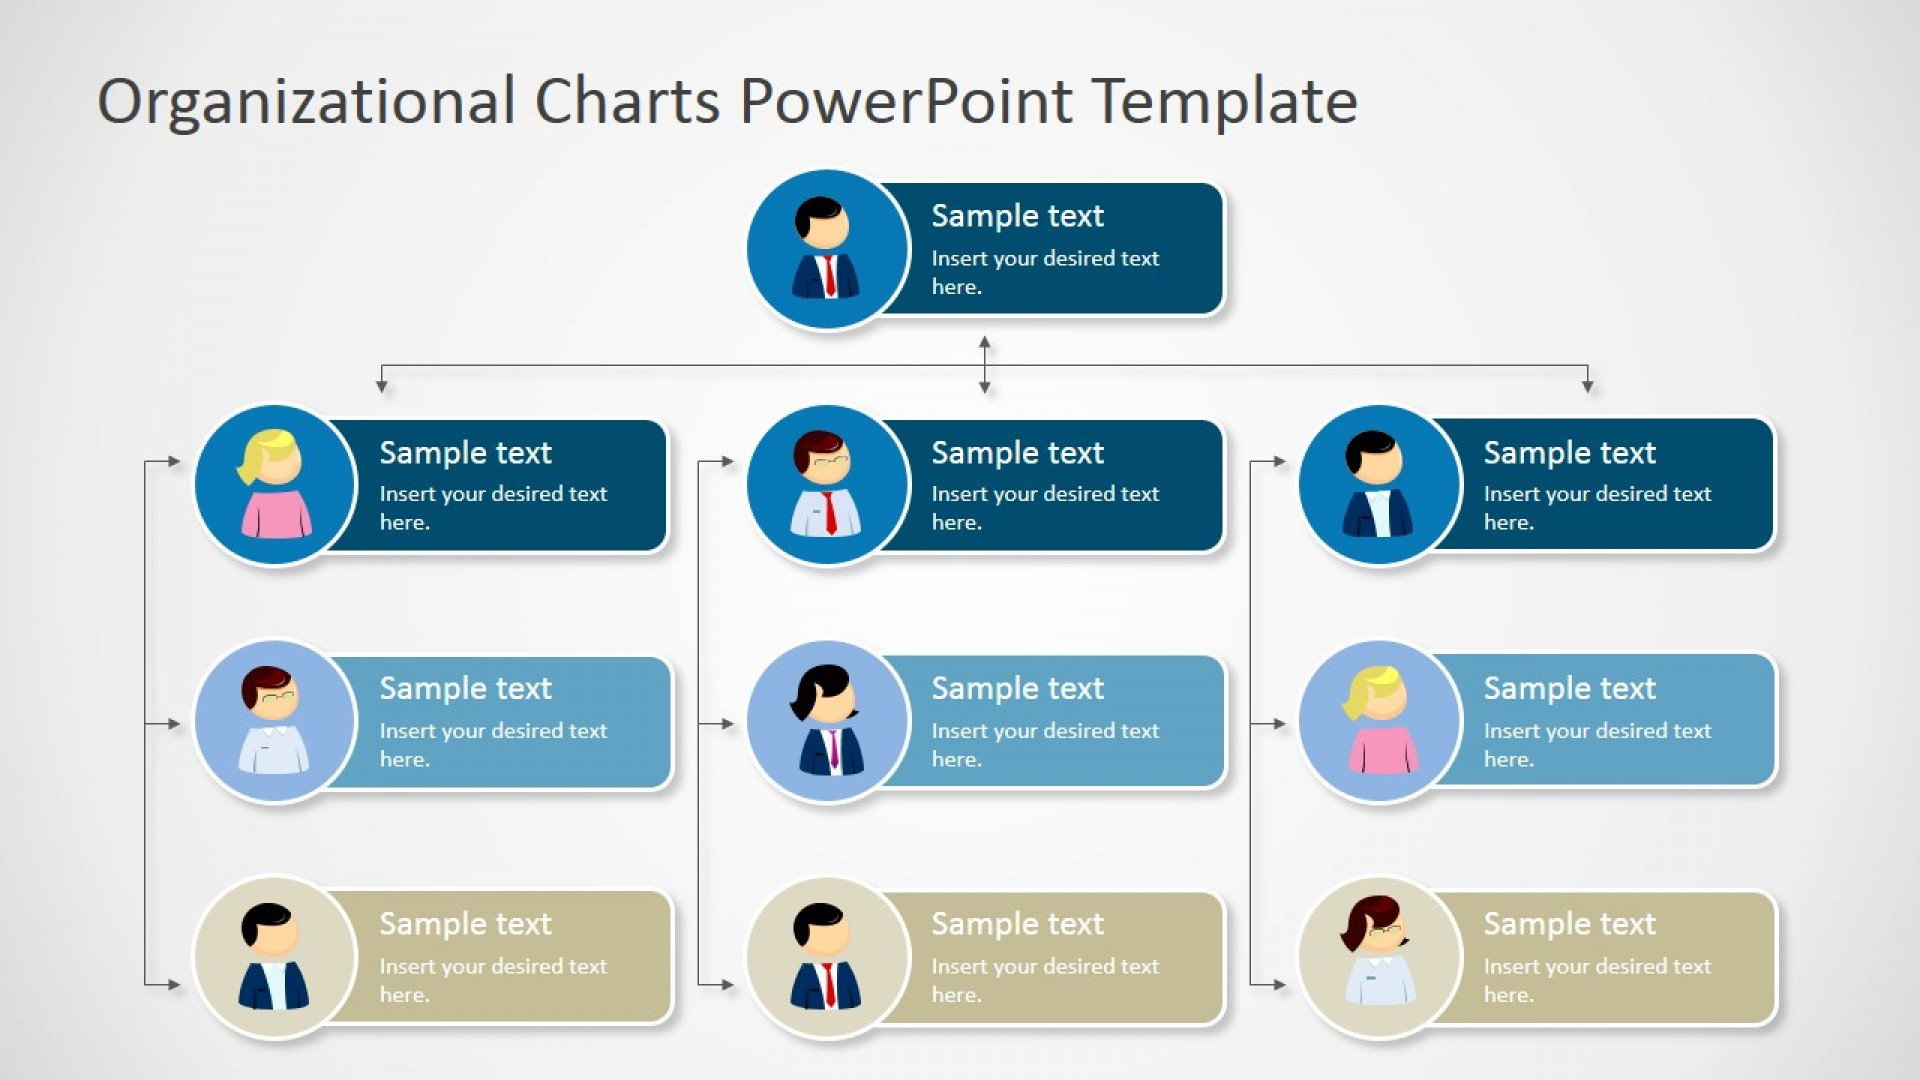 017 Microsoft Org Chart Template Powerpoint Organizational Intended For Microsoft Powerpoint Org Chart Template